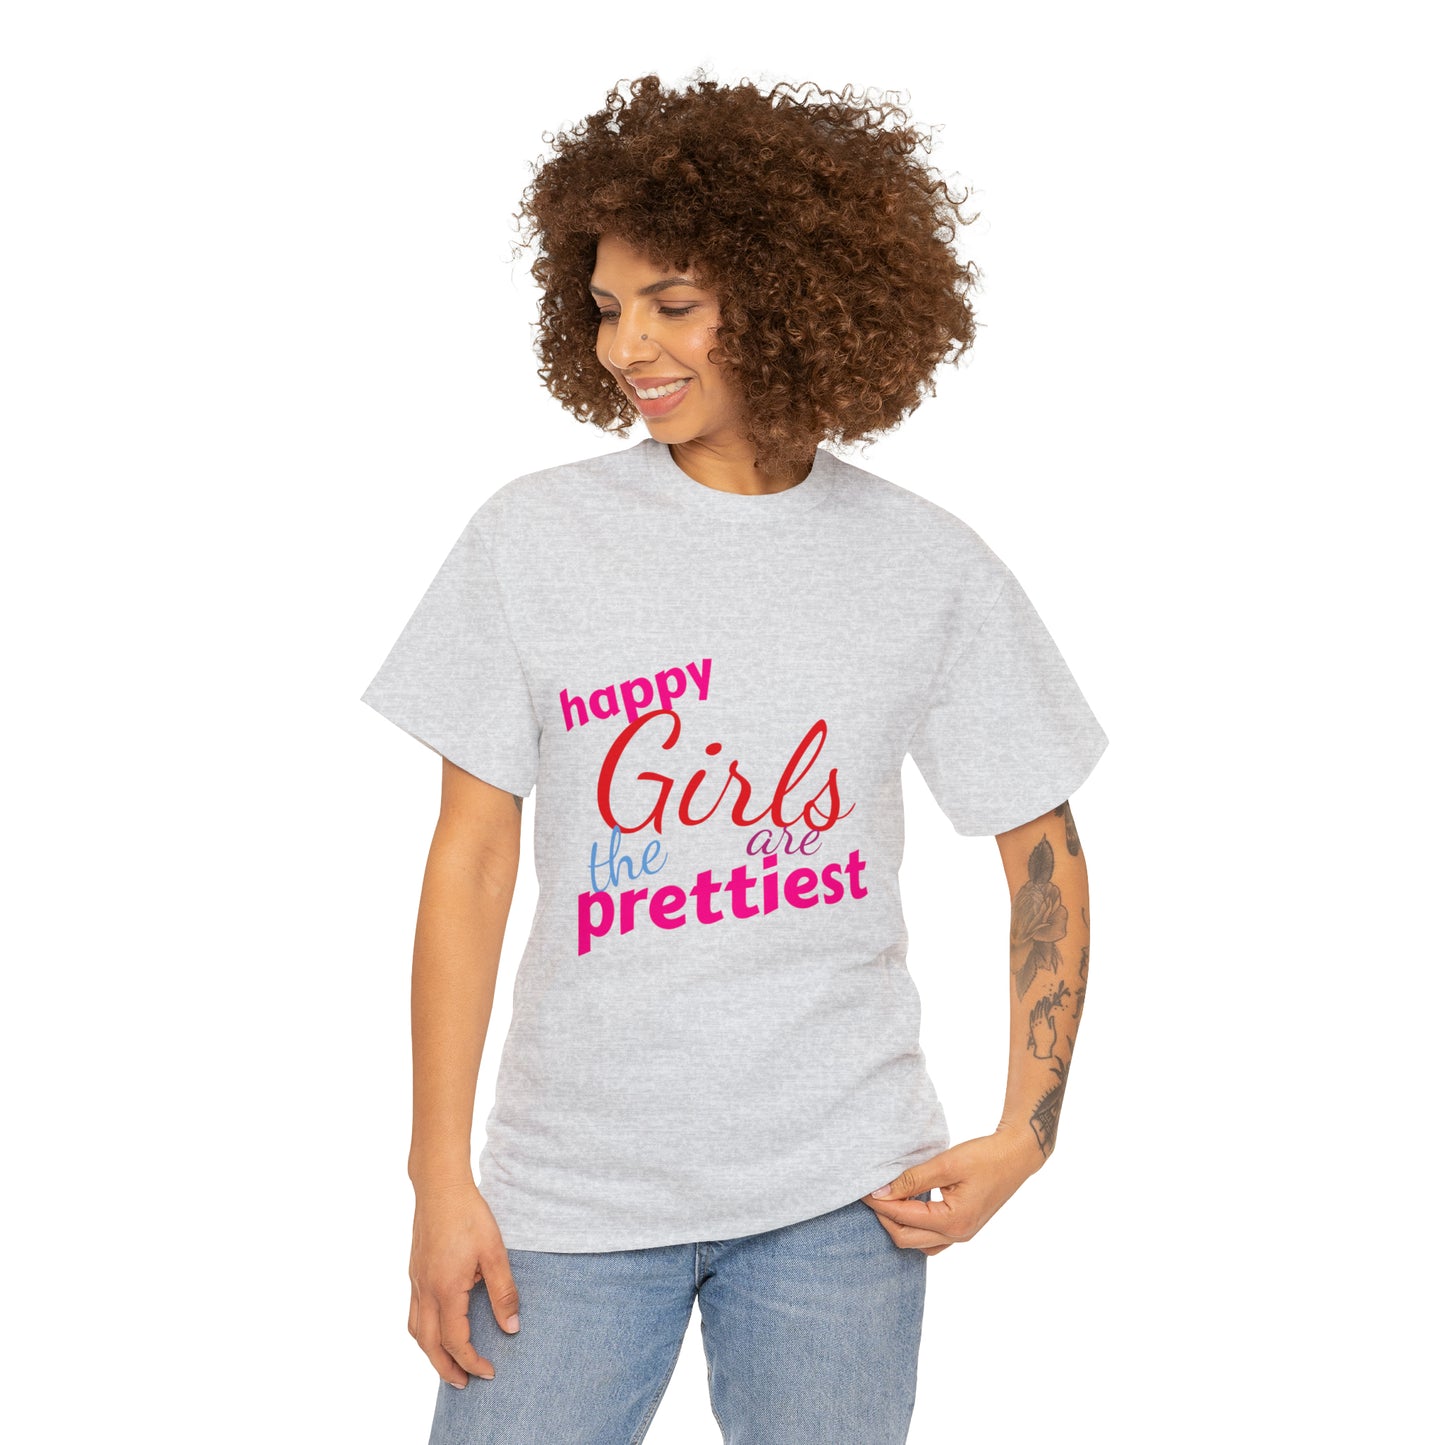 Short sleeve top - 'Happy Girls are the prettiest'